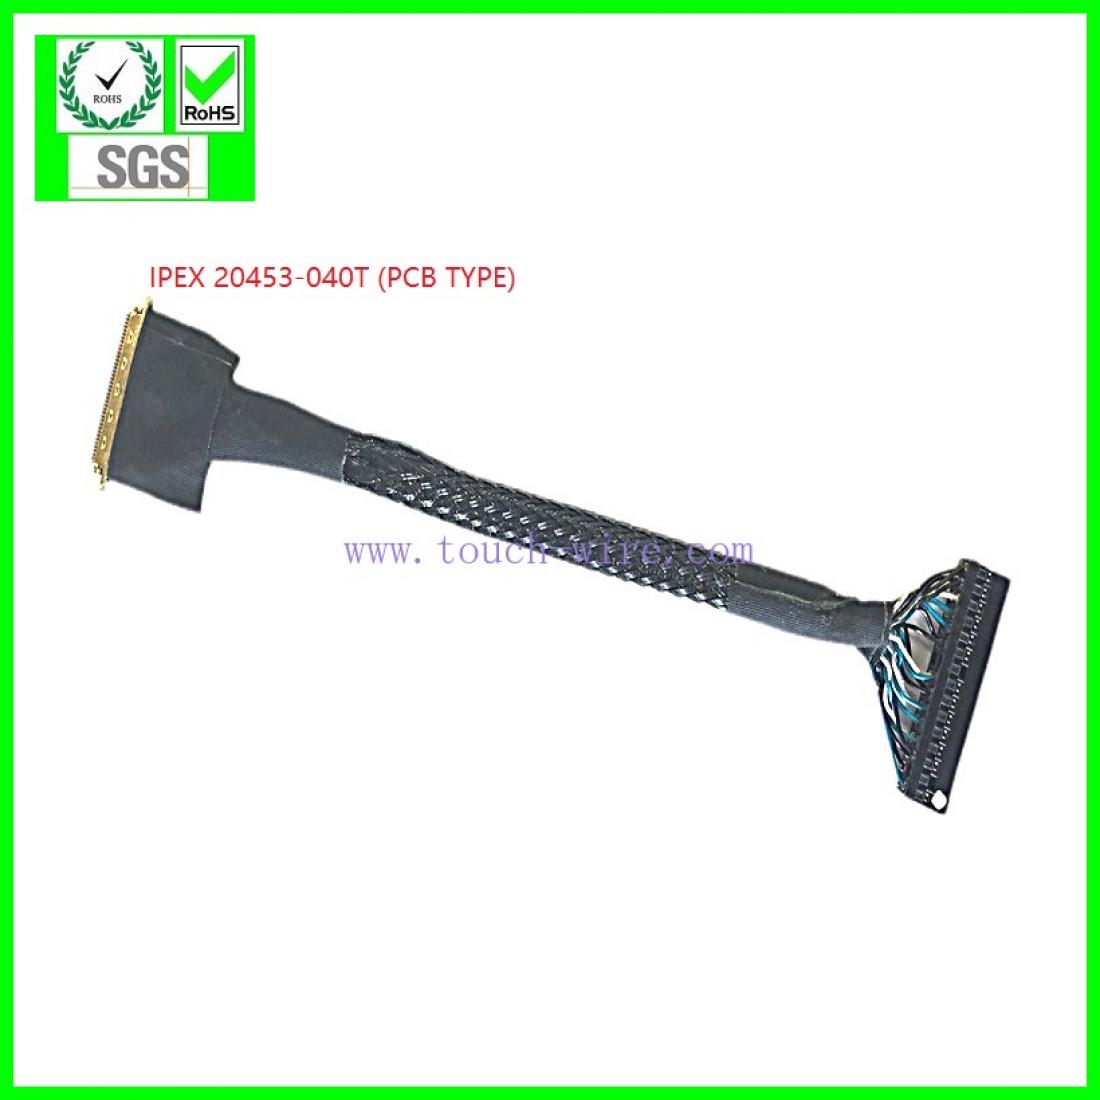  LVDS CABLE  ipex 20453-040 (PCB TYPE) to Dupon 2*15PIN 